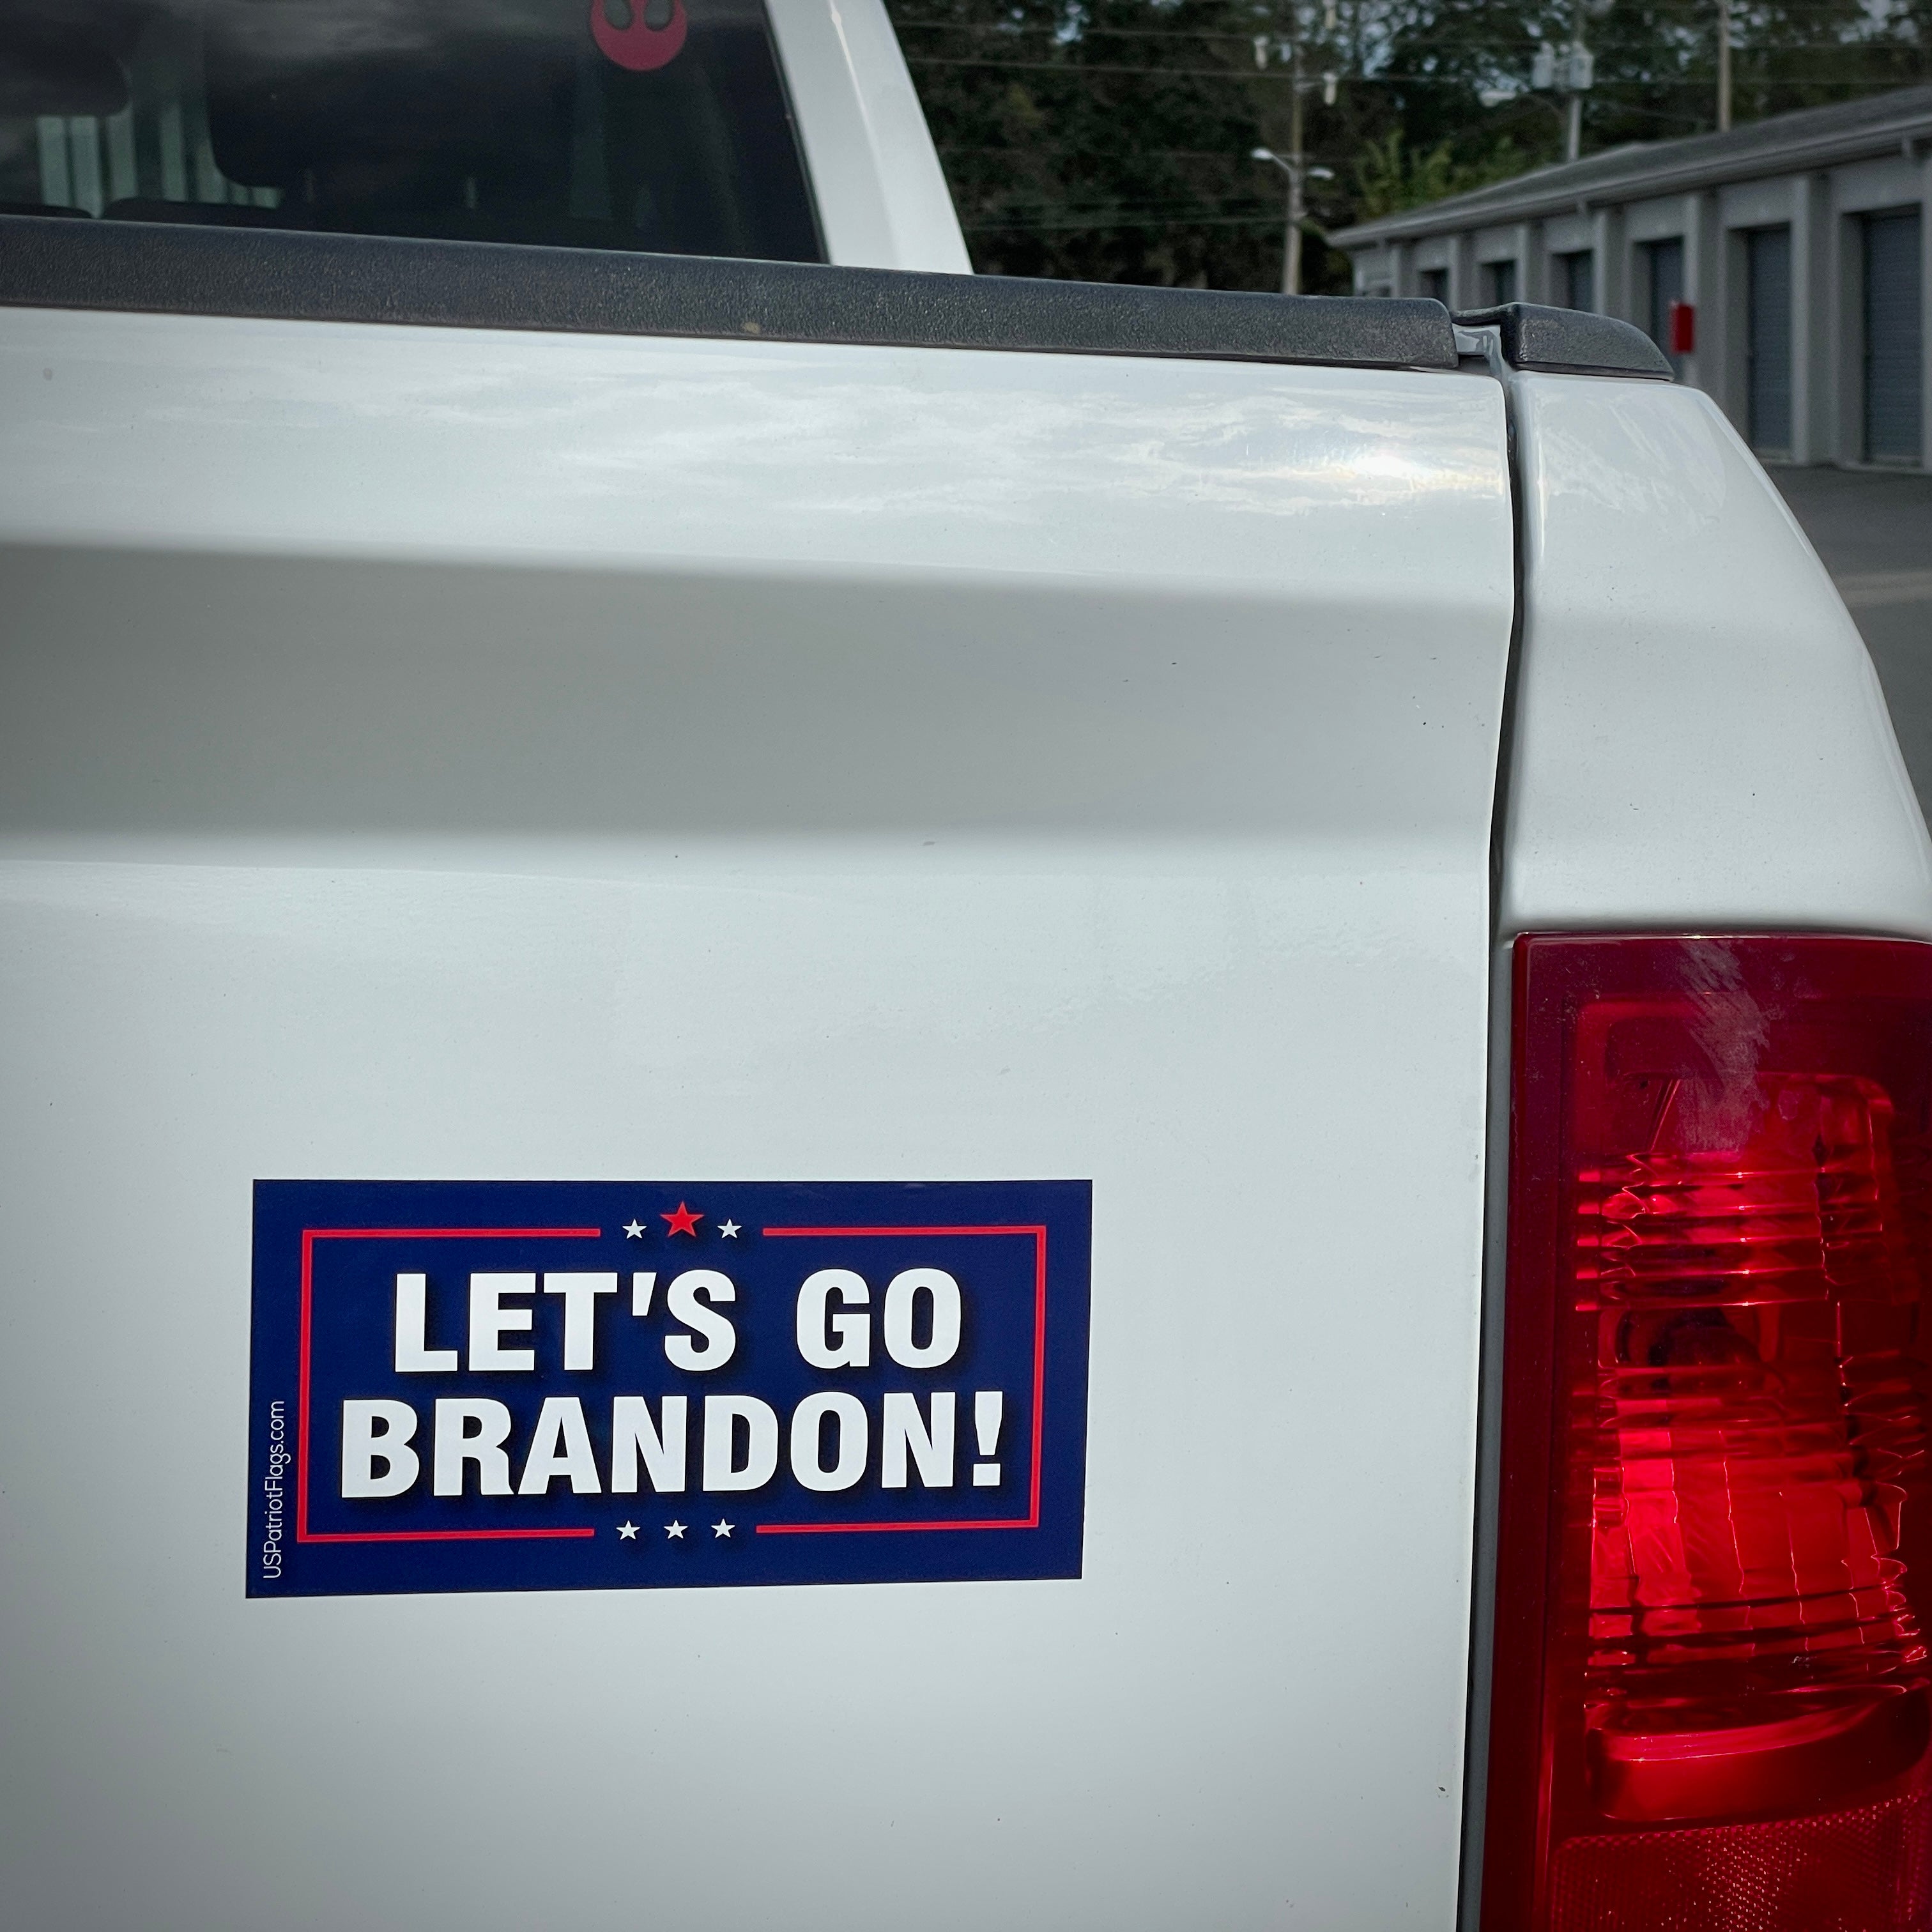 Made in USA. New Item. Buy in Quantity and Save! Let's Go Brandon bumper  sticker features a strong message to the Liberals. Made from Zip-Strips,  The Ultra Removable Bumper Sticker. Let's Go